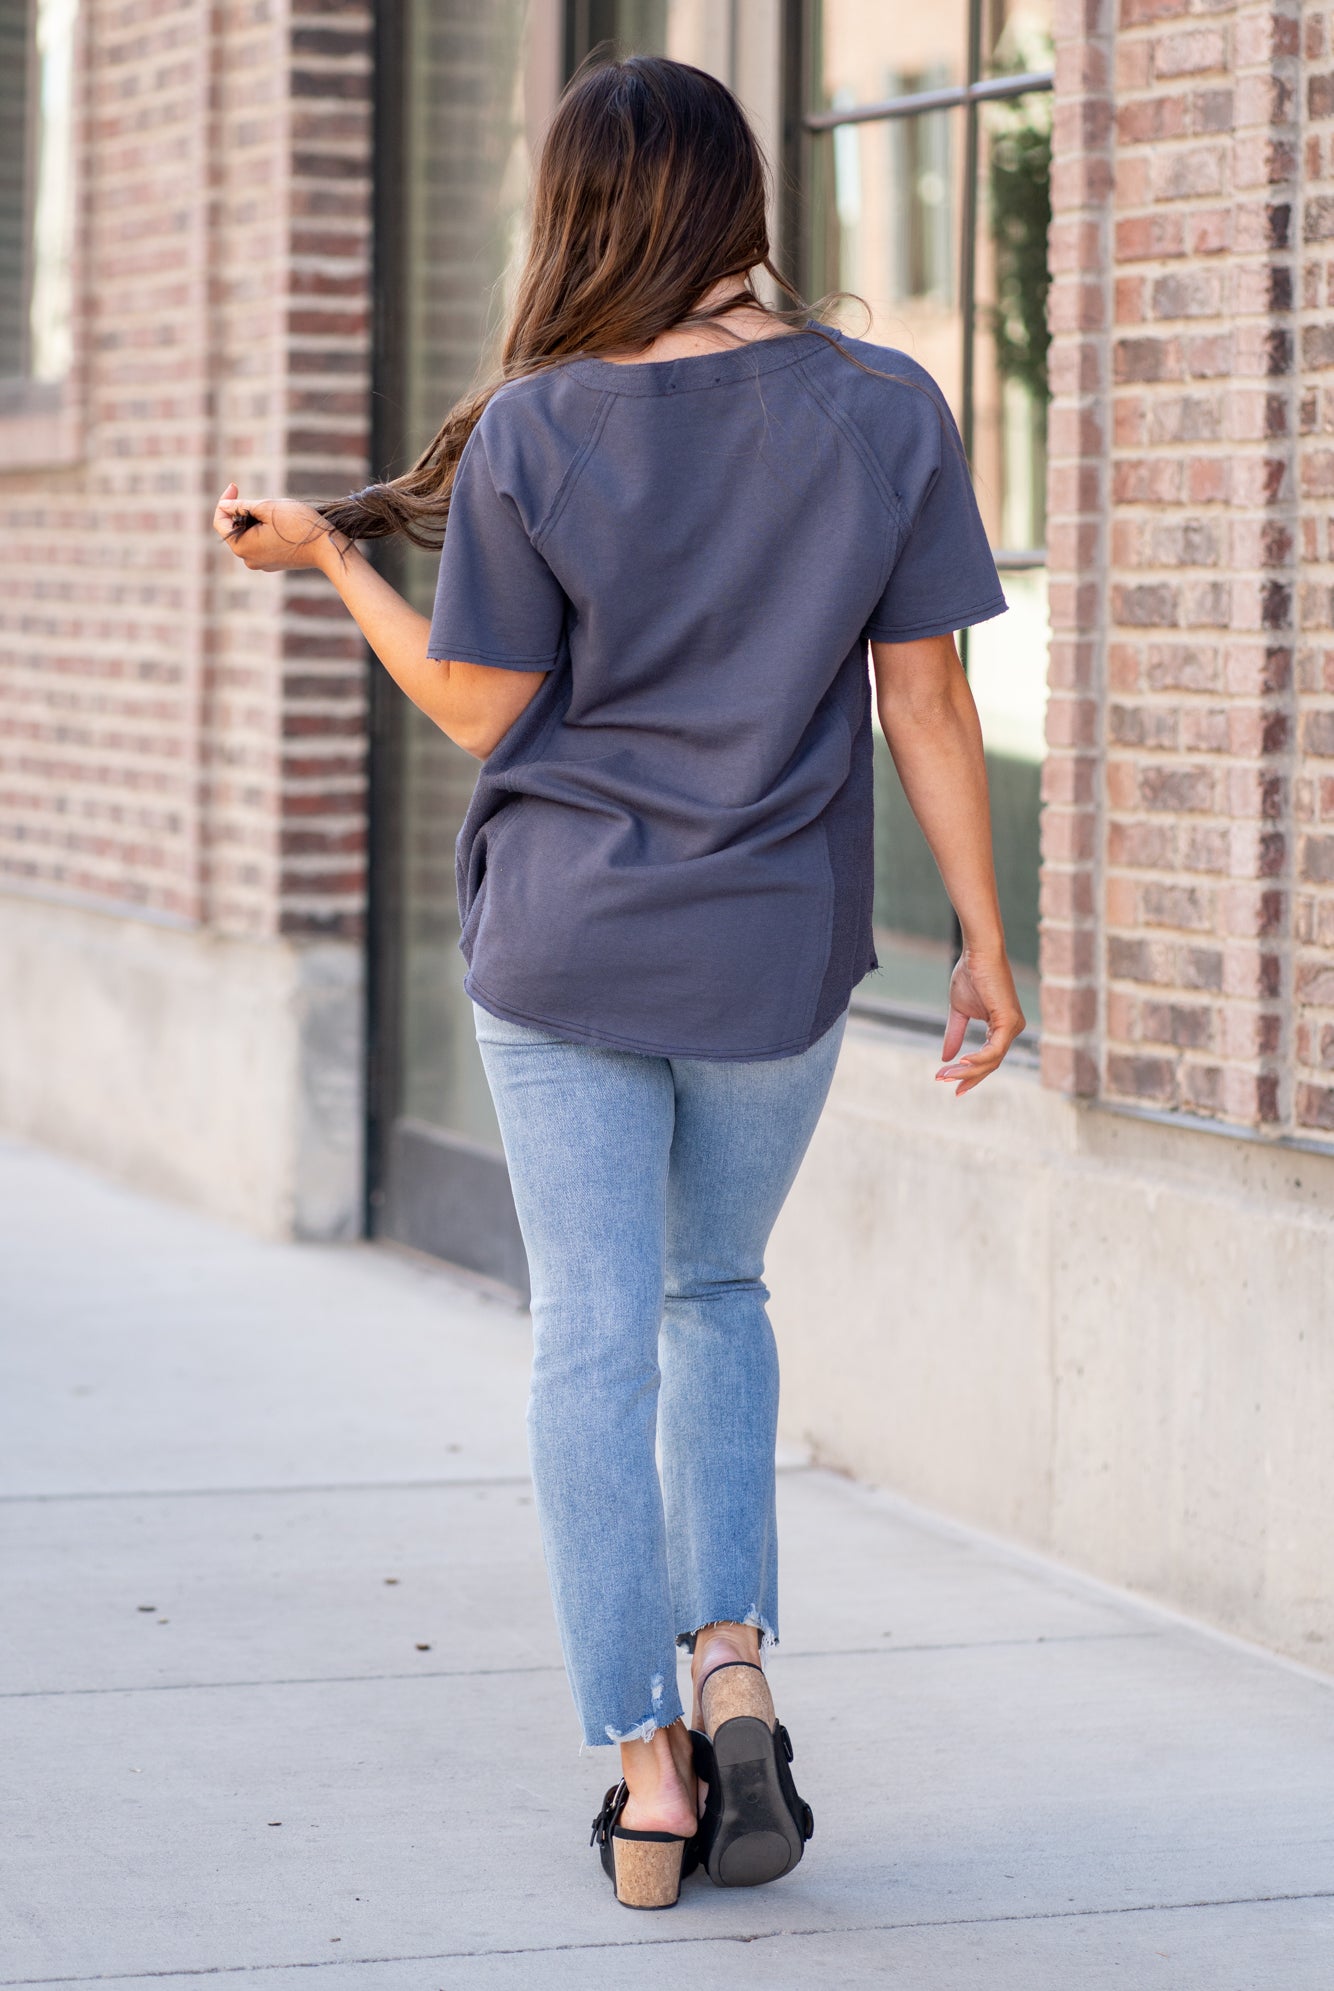 This short sleeve Henley top is great for layering up or down during winter and pairs well with any denim.  Color: Slate Grey Button Up Front Henley Raglan Top Neckline: Round Sleeve: Short Sleeve 80% COTTON 20% POLYESTER Style #: FBT7658-A19-Slategrey Contact us for any additional measurements or sizing.